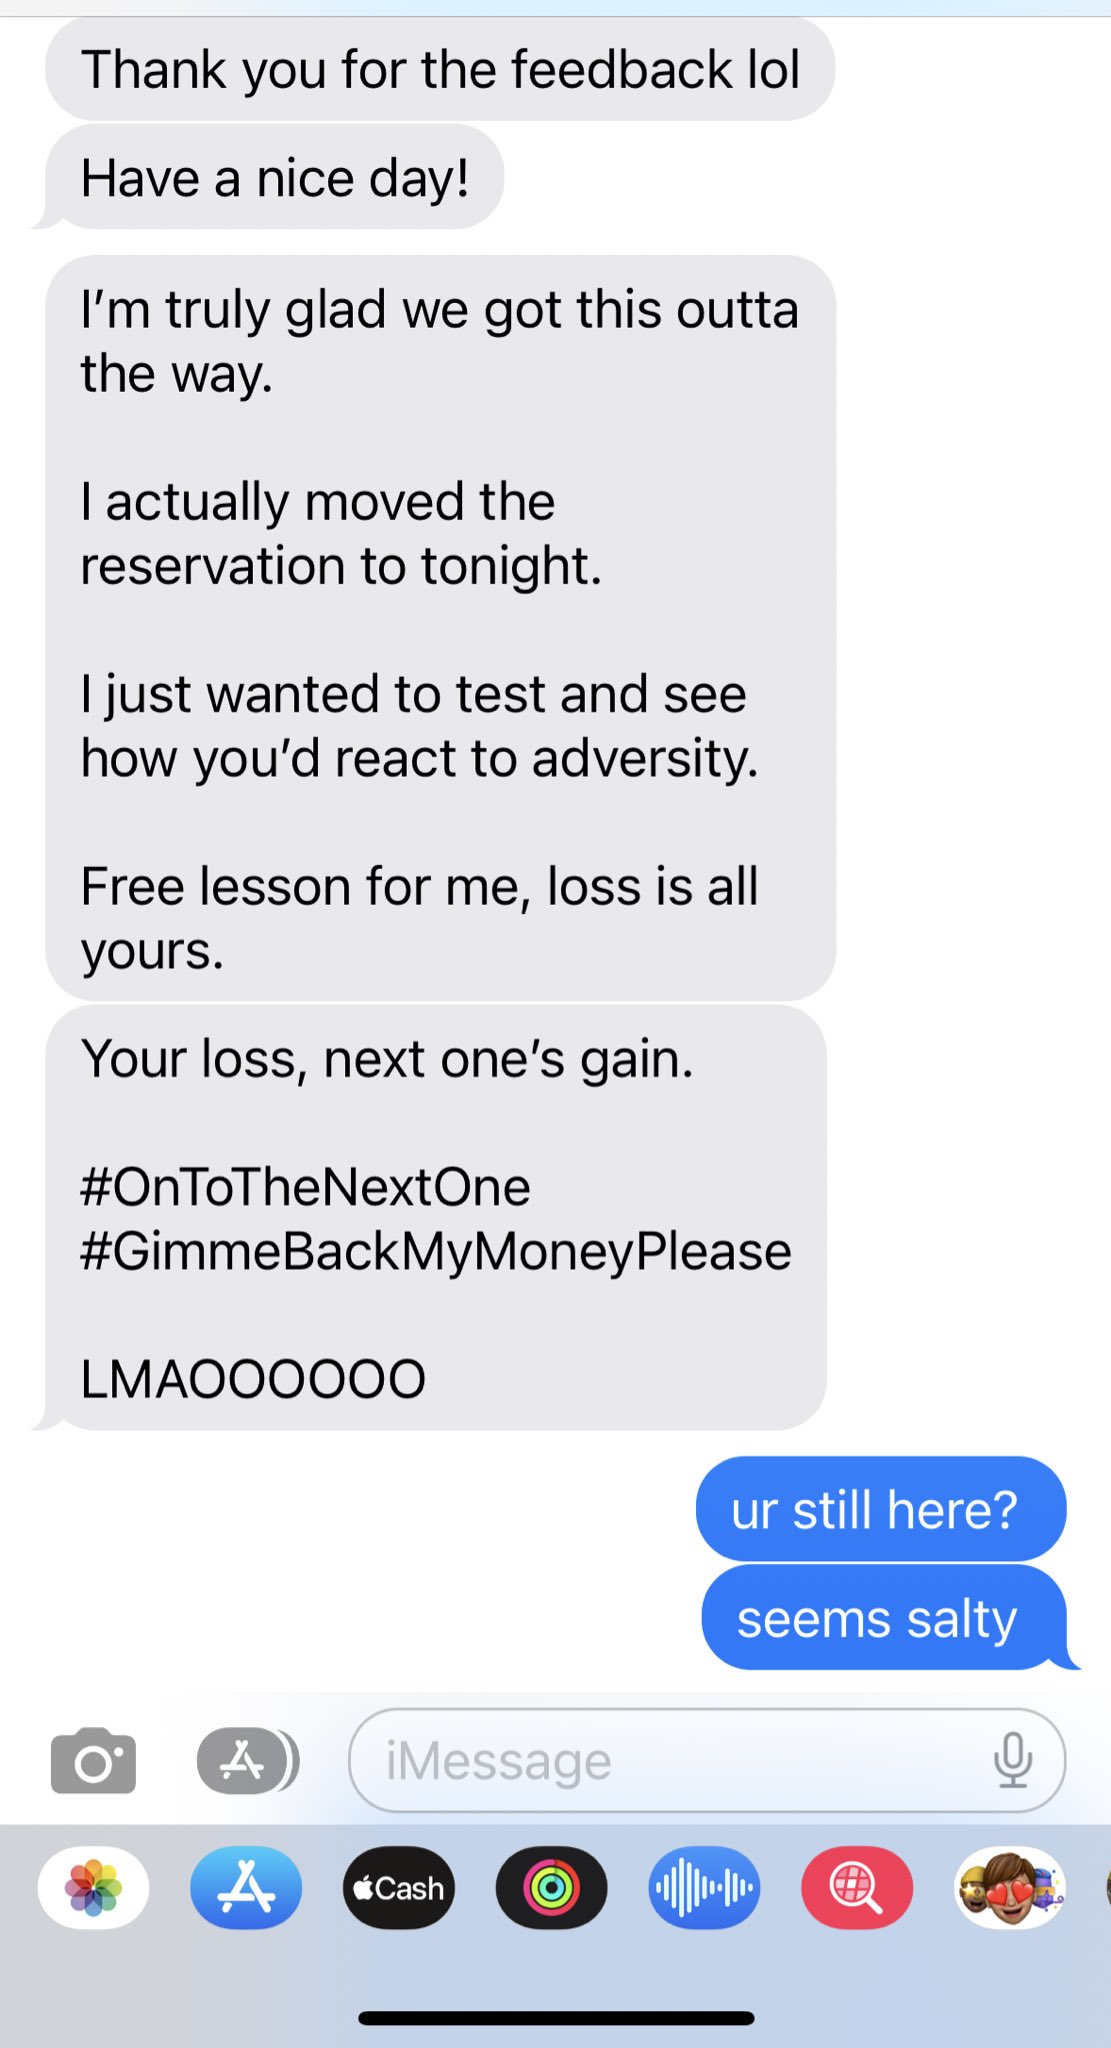 miserable dating story twitter - screenshot - Thank you for the feedback lol Have a nice day! I'm truly glad we got this outta the way. I actually moved the reservation to tonight. I just wanted to test and see how you'd react to adversity. Free lesson fo